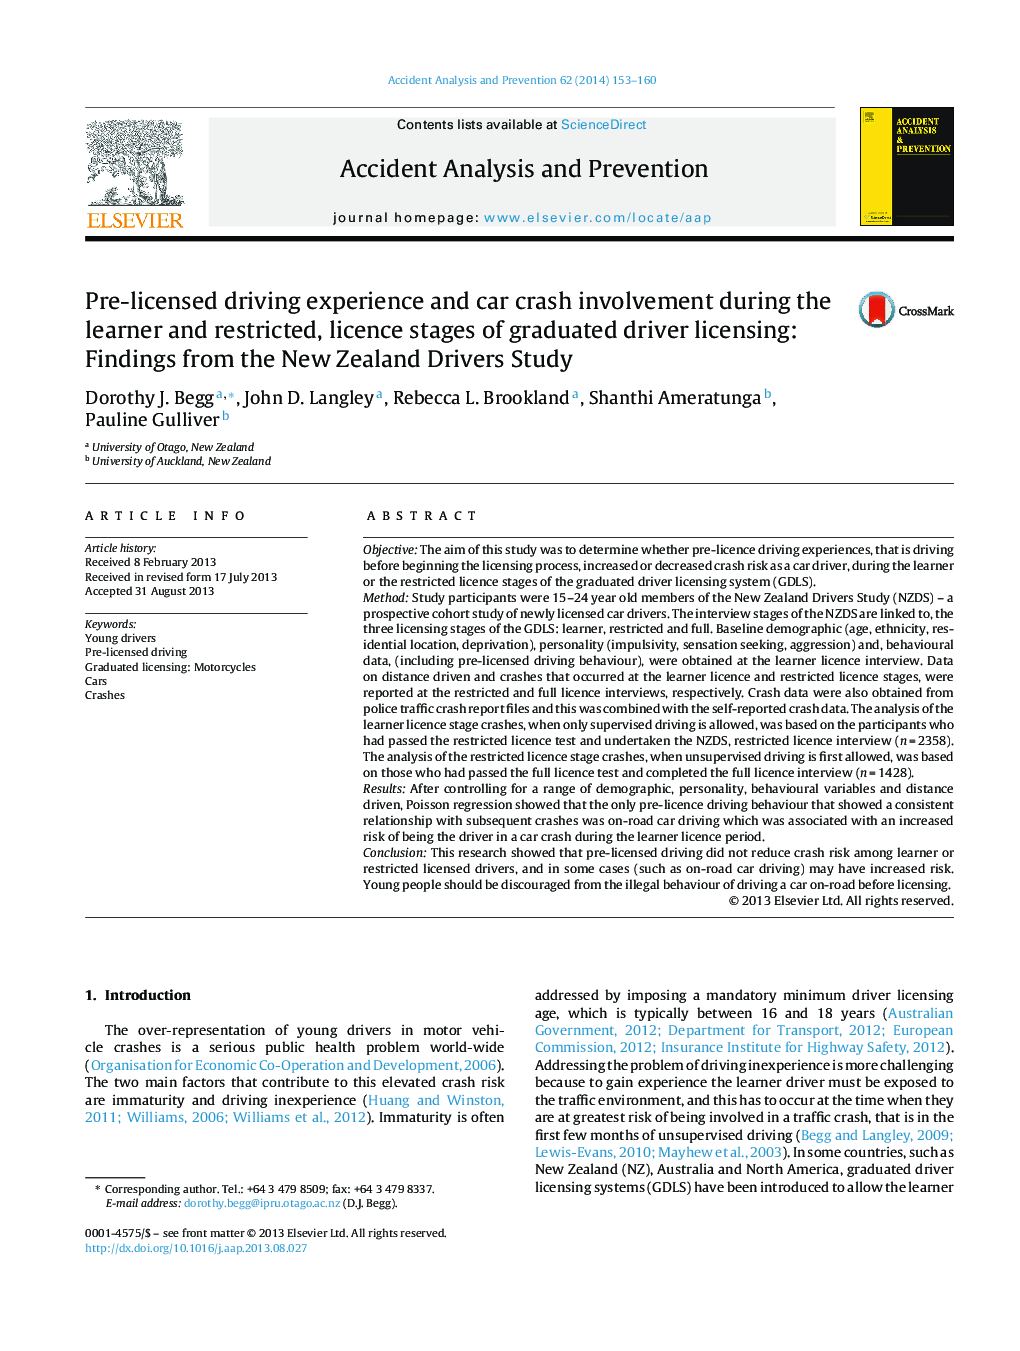 Pre-licensed driving experience and car crash involvement during the learner and restricted, licence stages of graduated driver licensing: Findings from the New Zealand Drivers Study